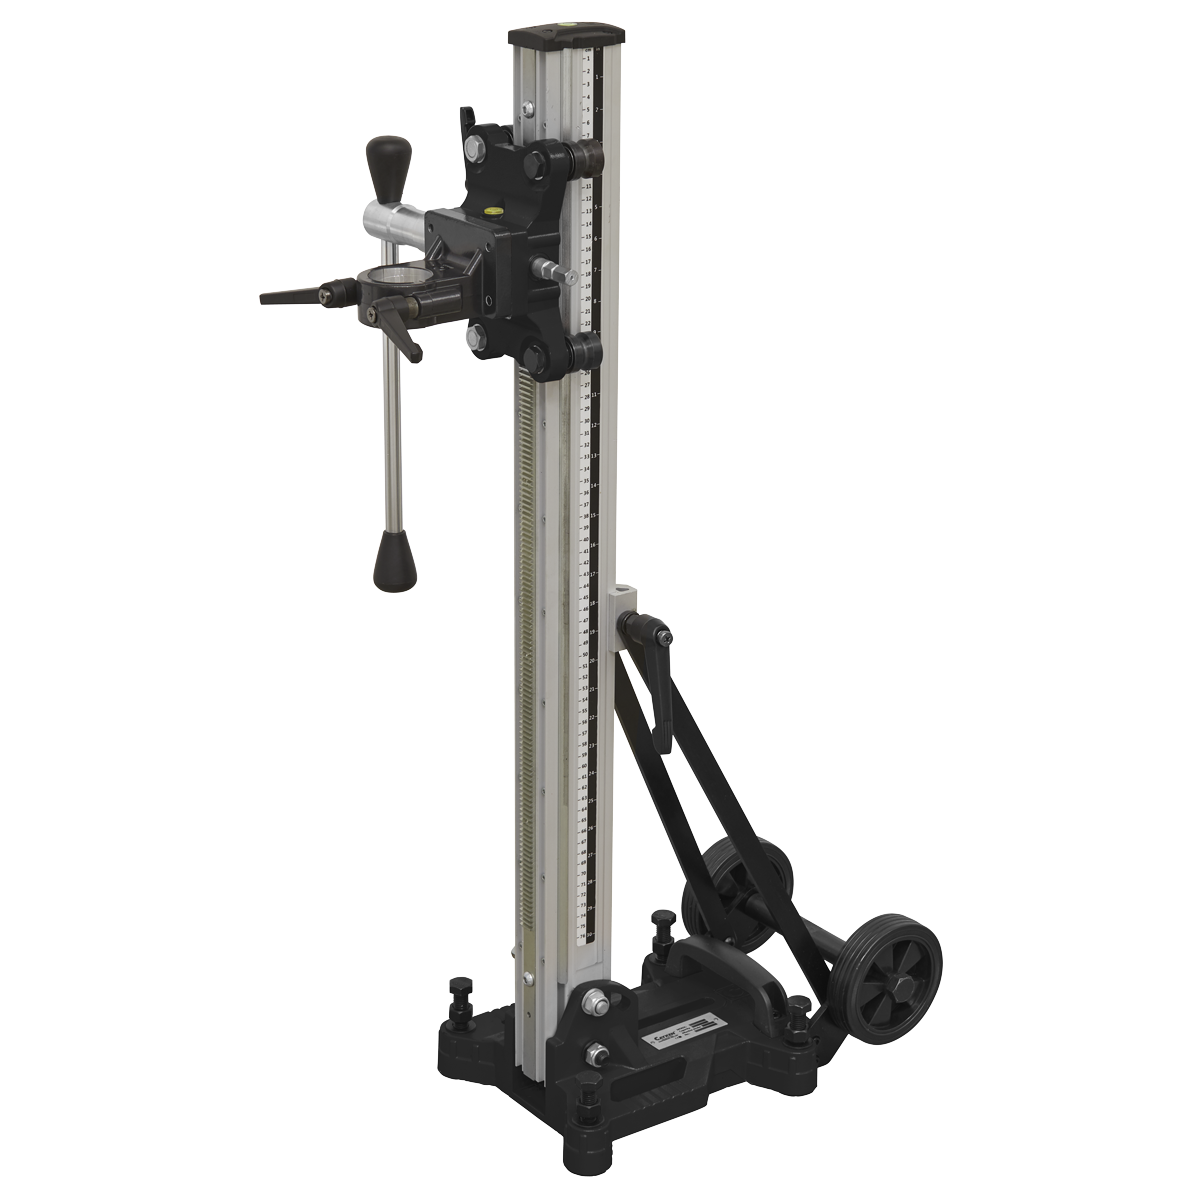 Portable Sealey Diamond Core Drill Stand DCDST